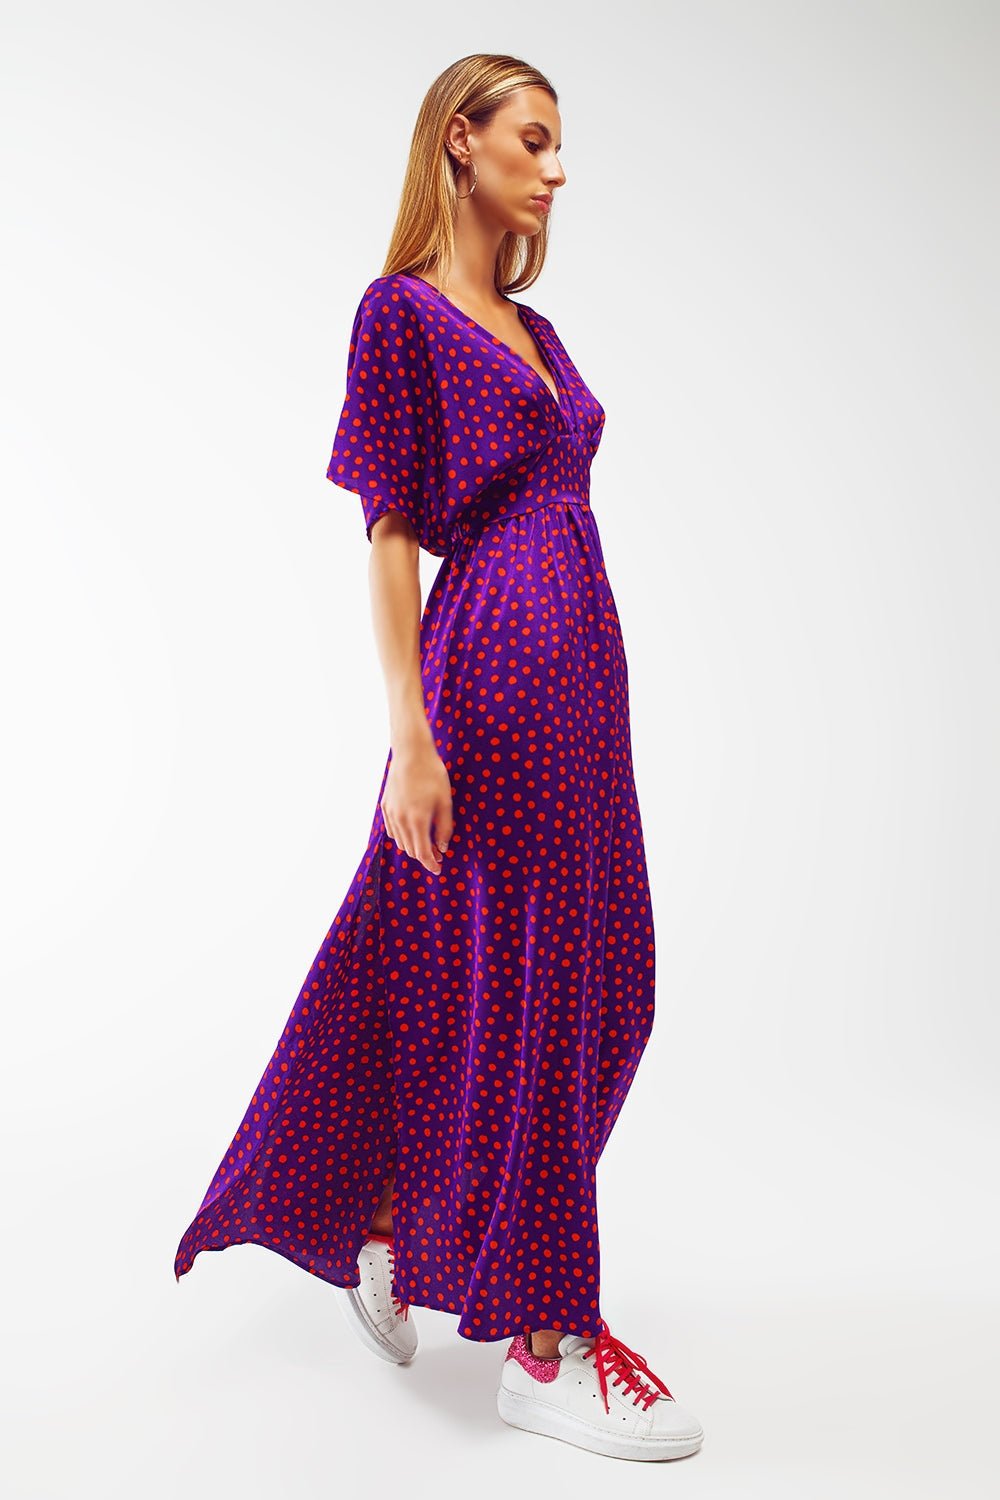 Maxi Cinched at the Waist Dress With Angel Sleeves in Purple Polka Dot - Mack & Harvie